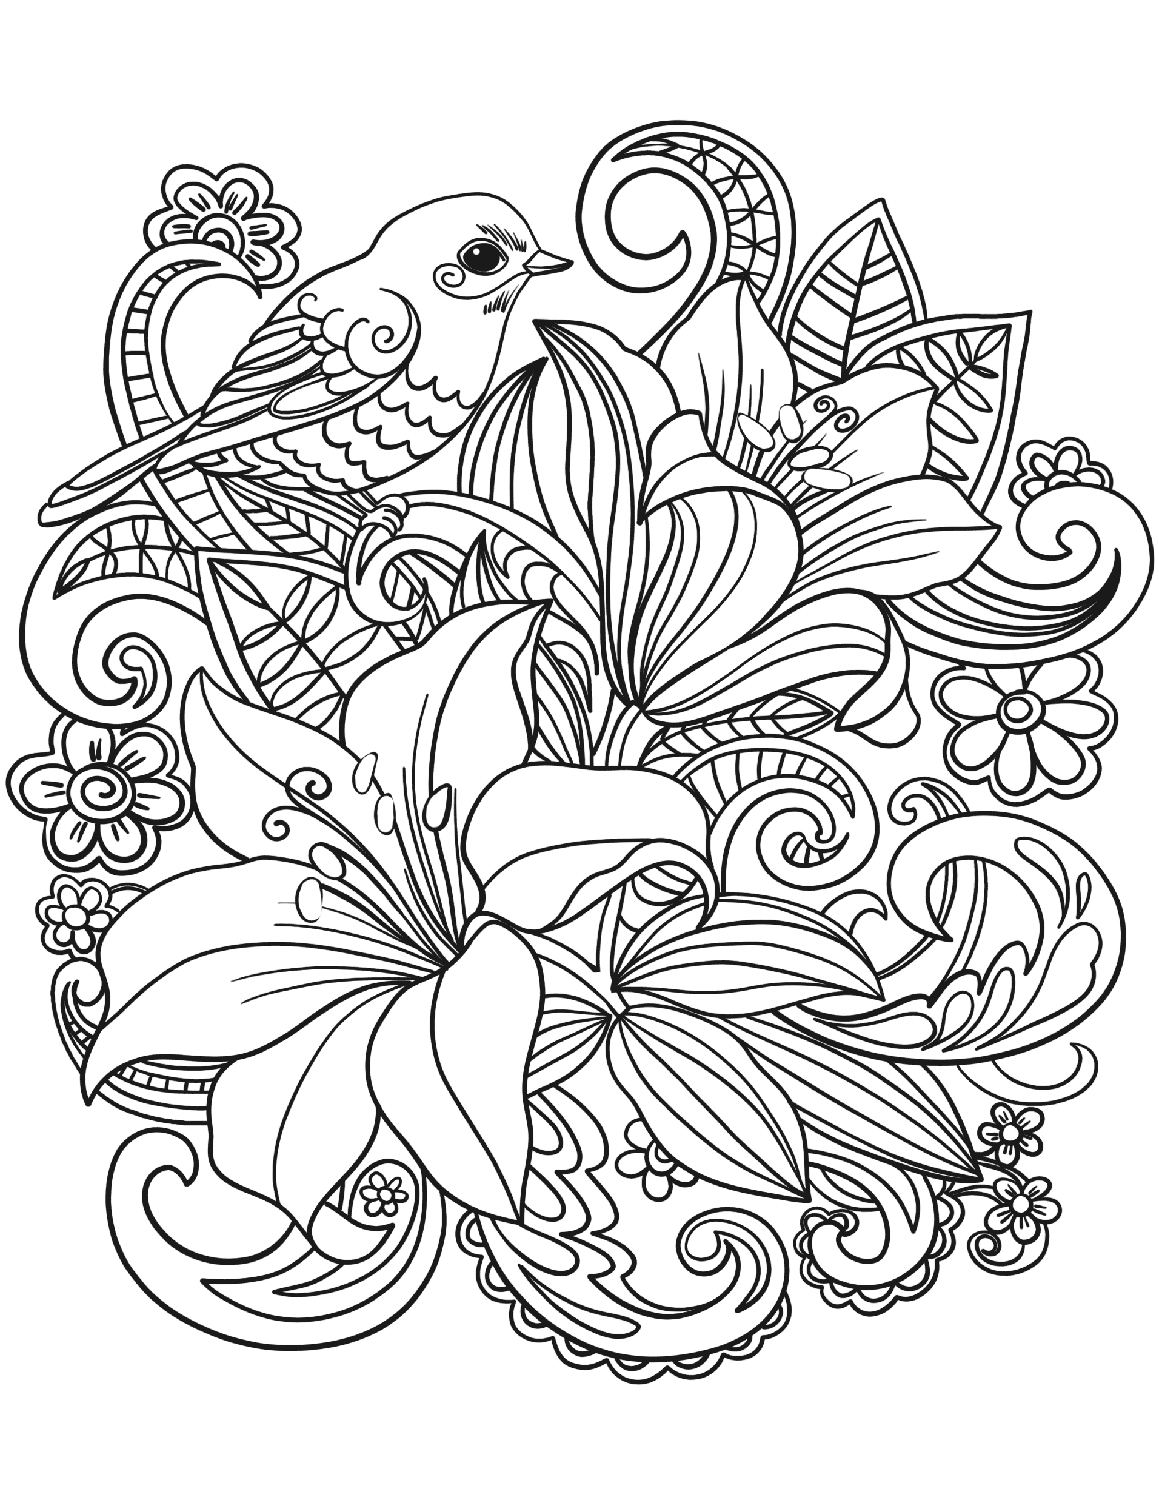 Adult coloring pages printable - julumba